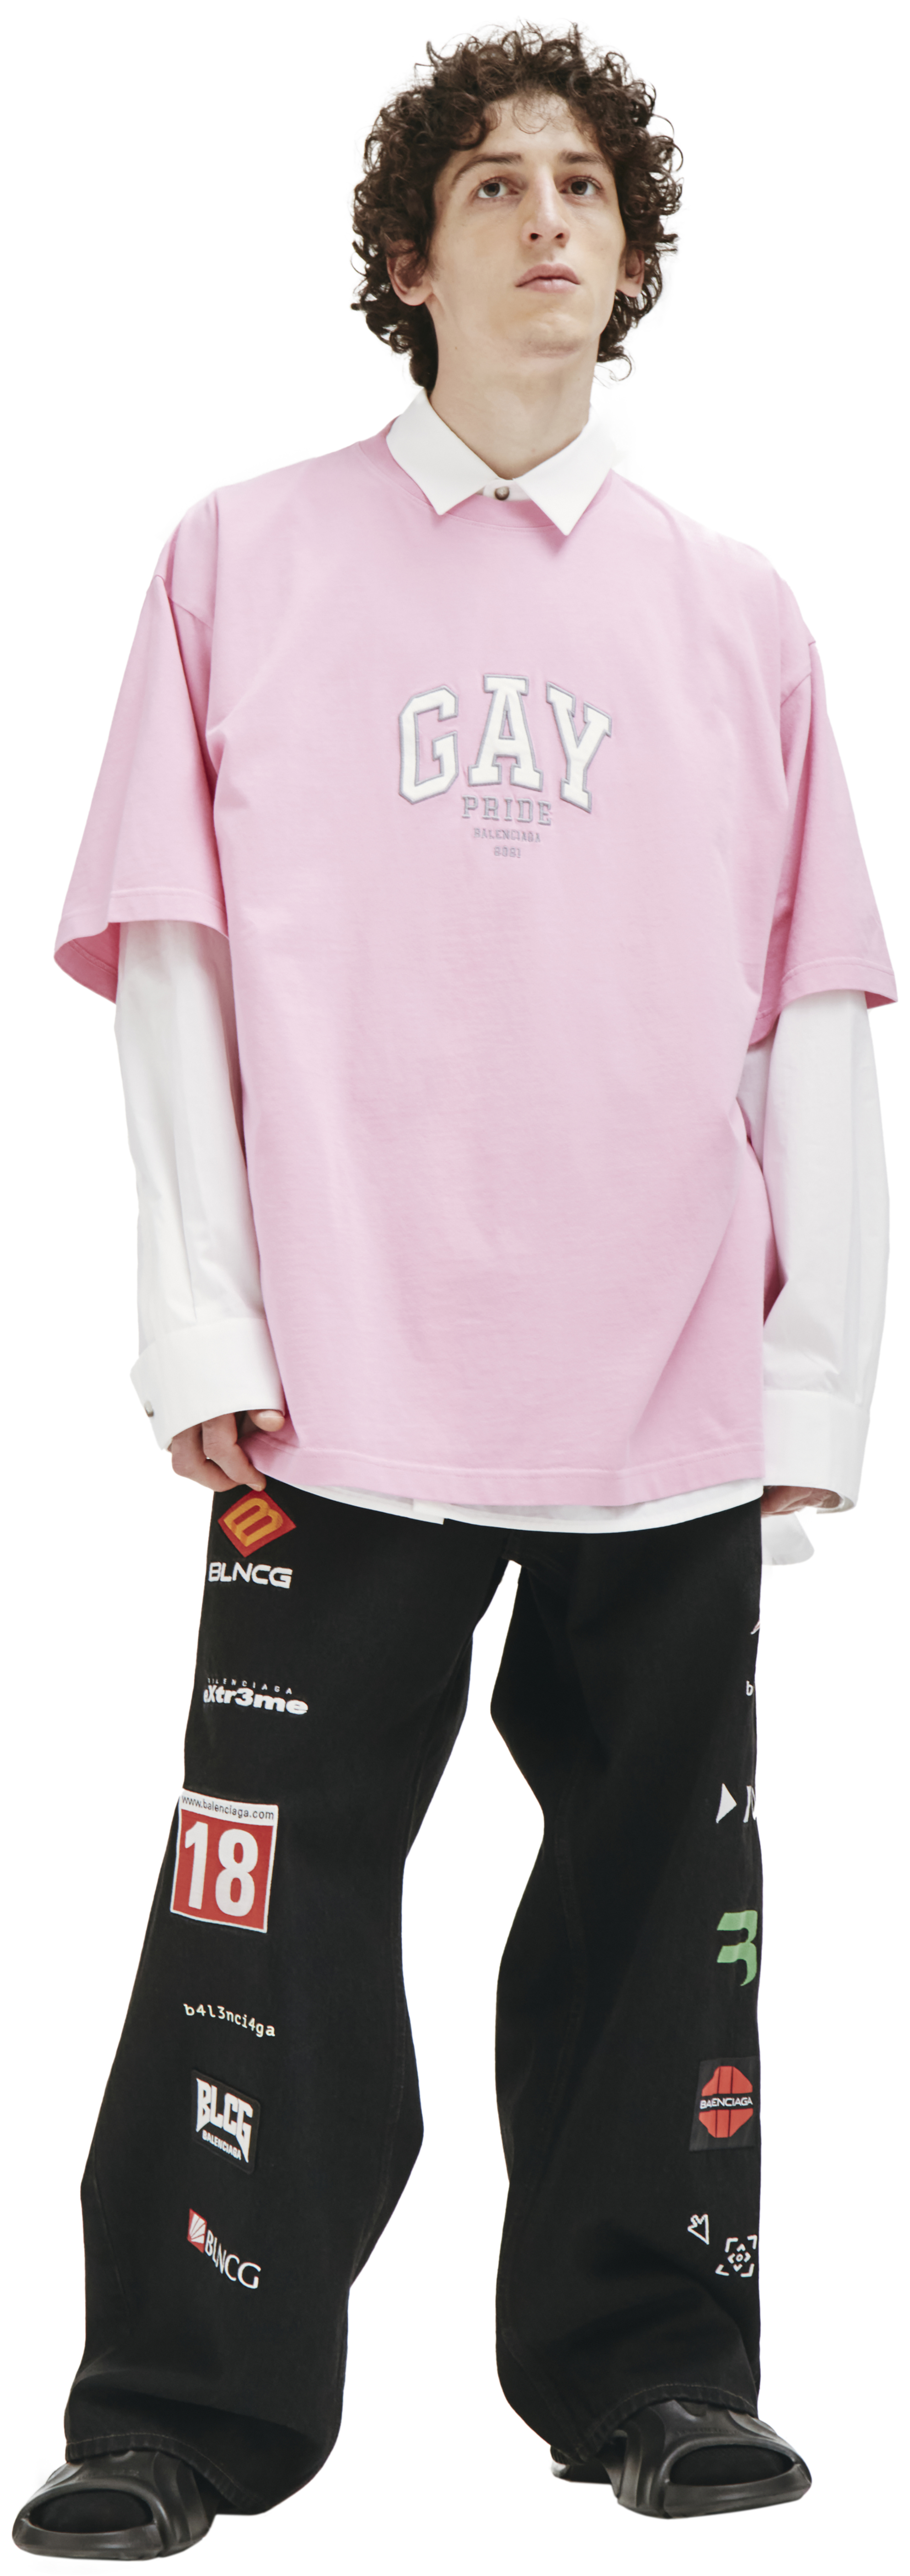 Buy Balenciaga men pink pride' embroided t-shirt for $569 online on 651795/TLV93/0586